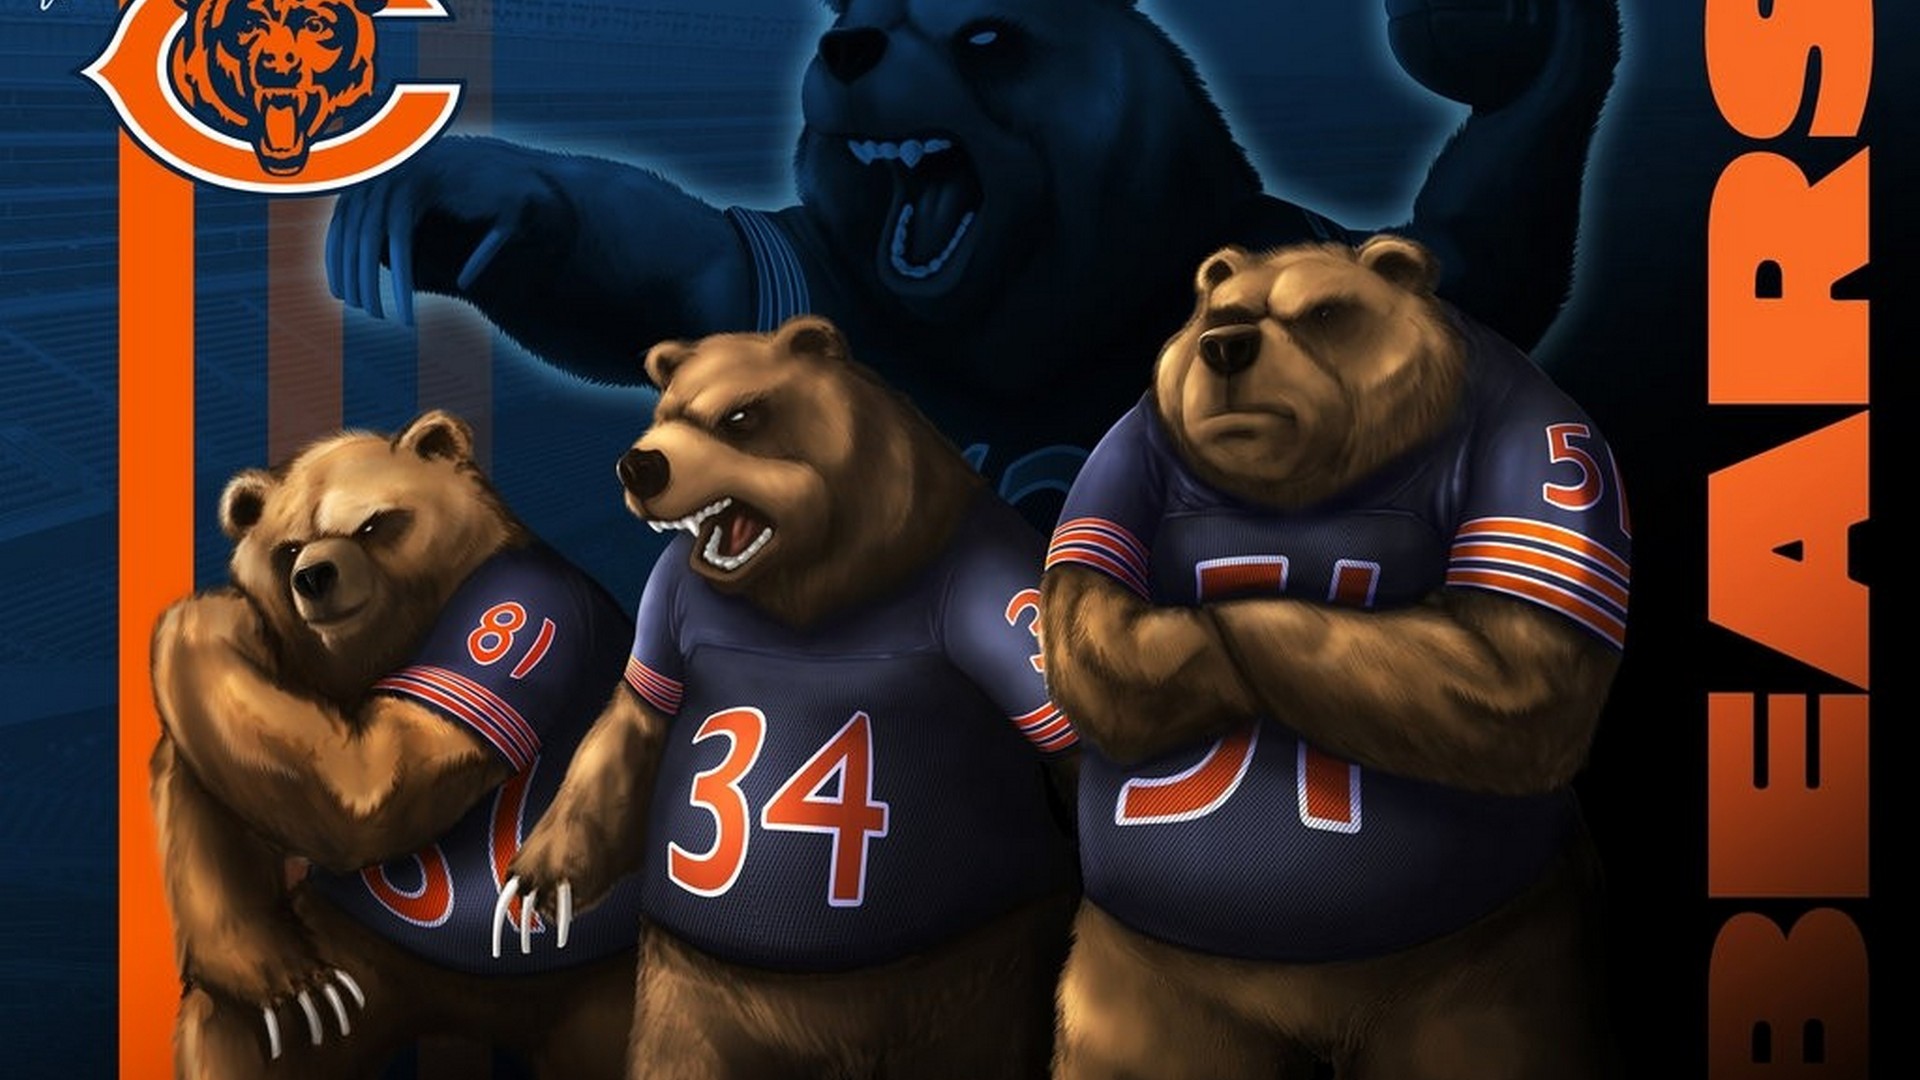 HD Backgrounds Chicago Bears | 2019 NFL Football Wallpapers